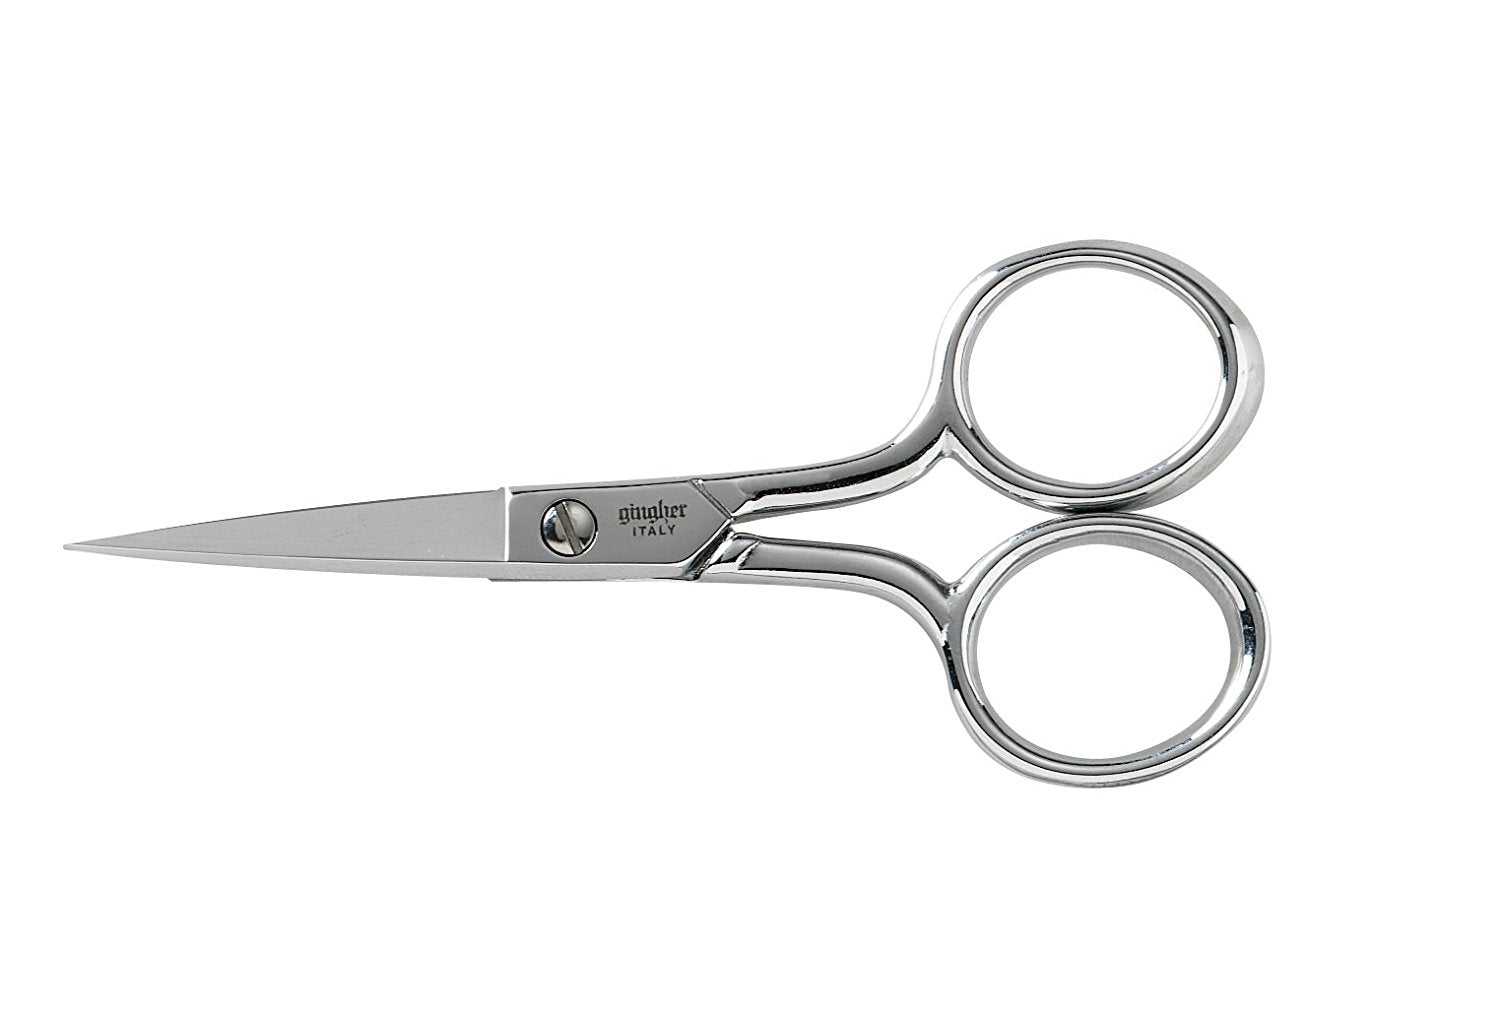 Gingher 4-inch Embroidery Scissor